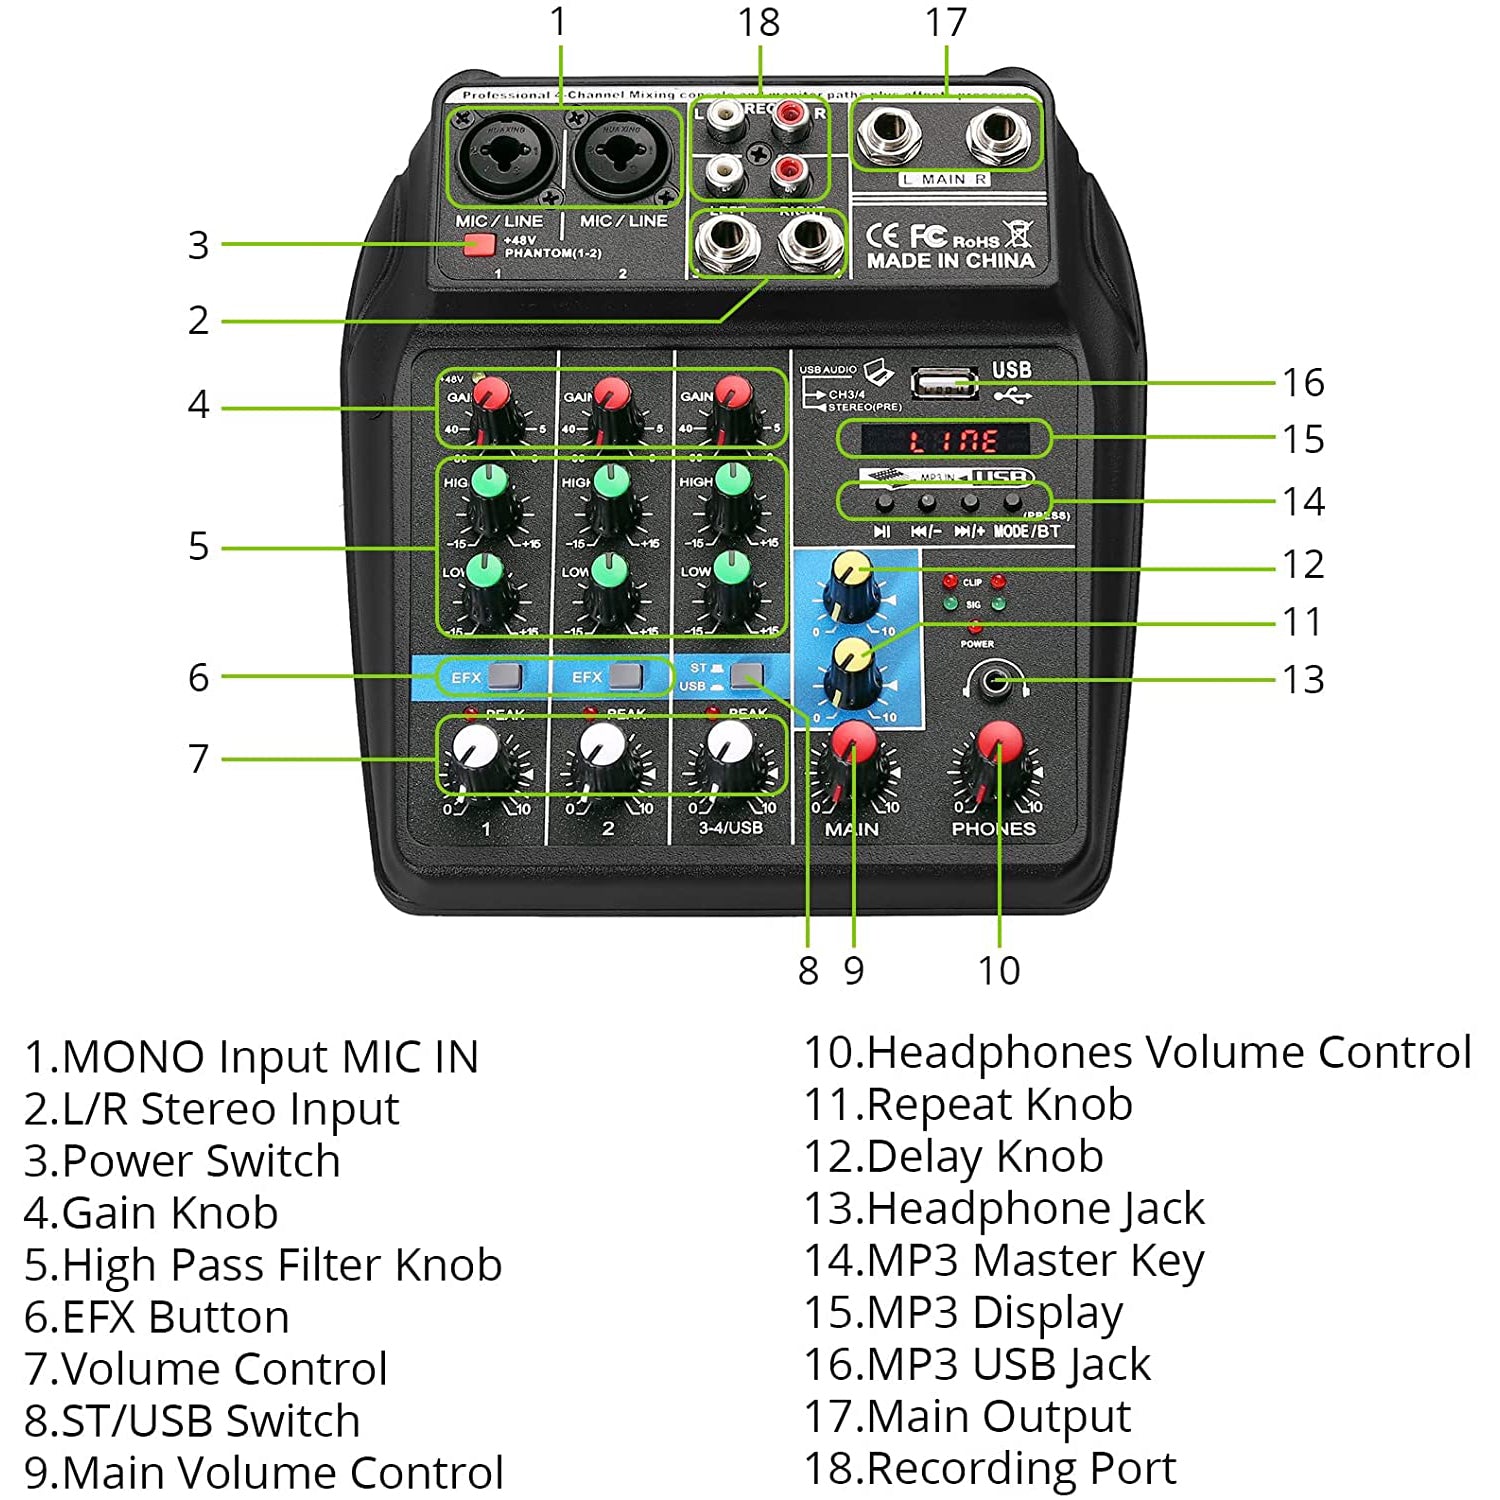 LiNKFOR Portable 4-Channel Audio Mixer Bluetooth 5.0